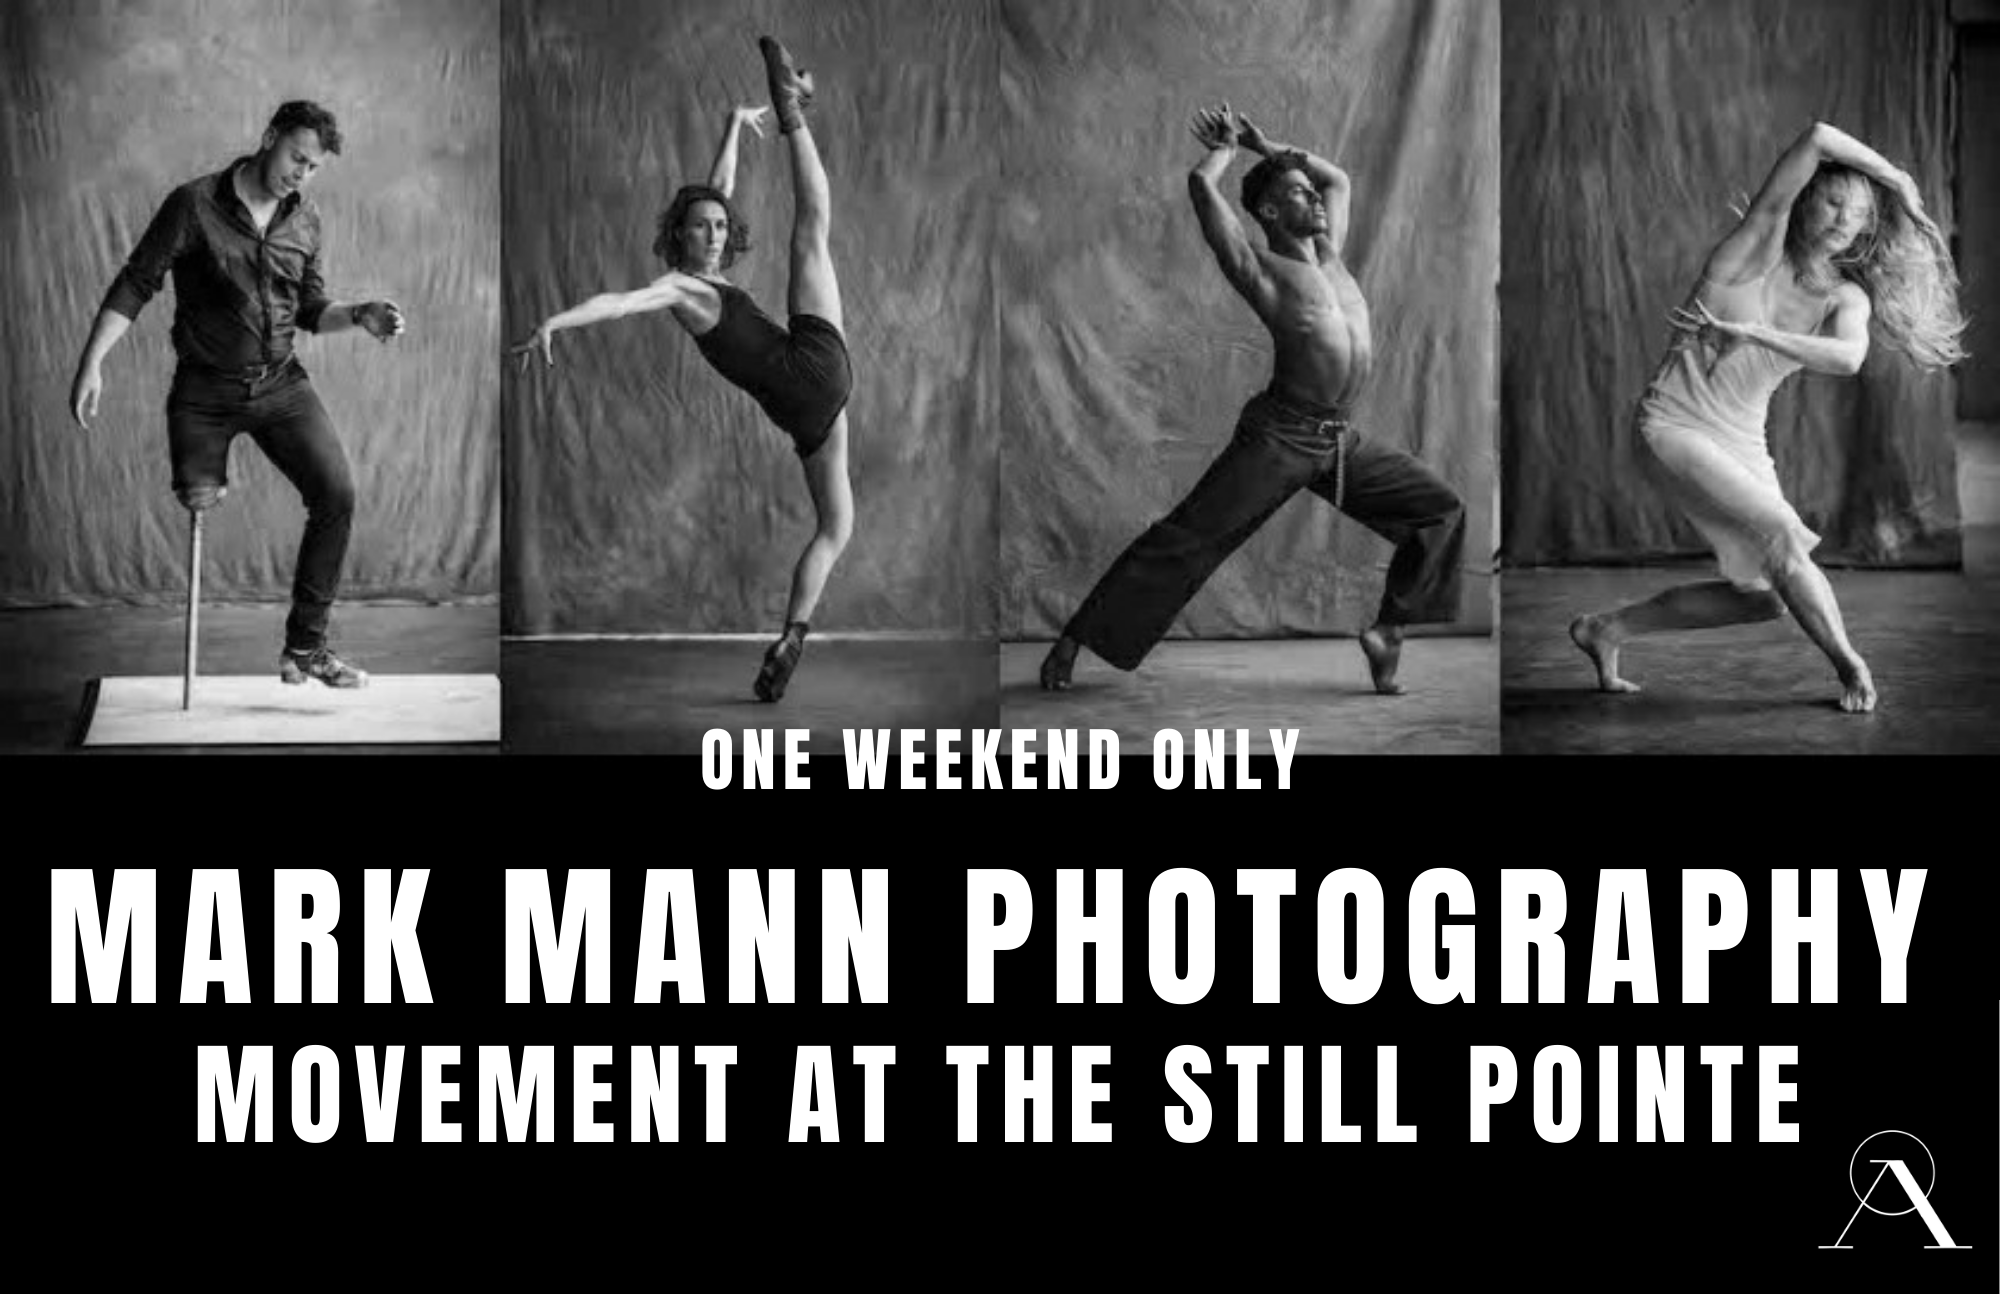 Event at Arete Gallery in New Hope, PA: Mark Mann Photography, Movement at the Still Point